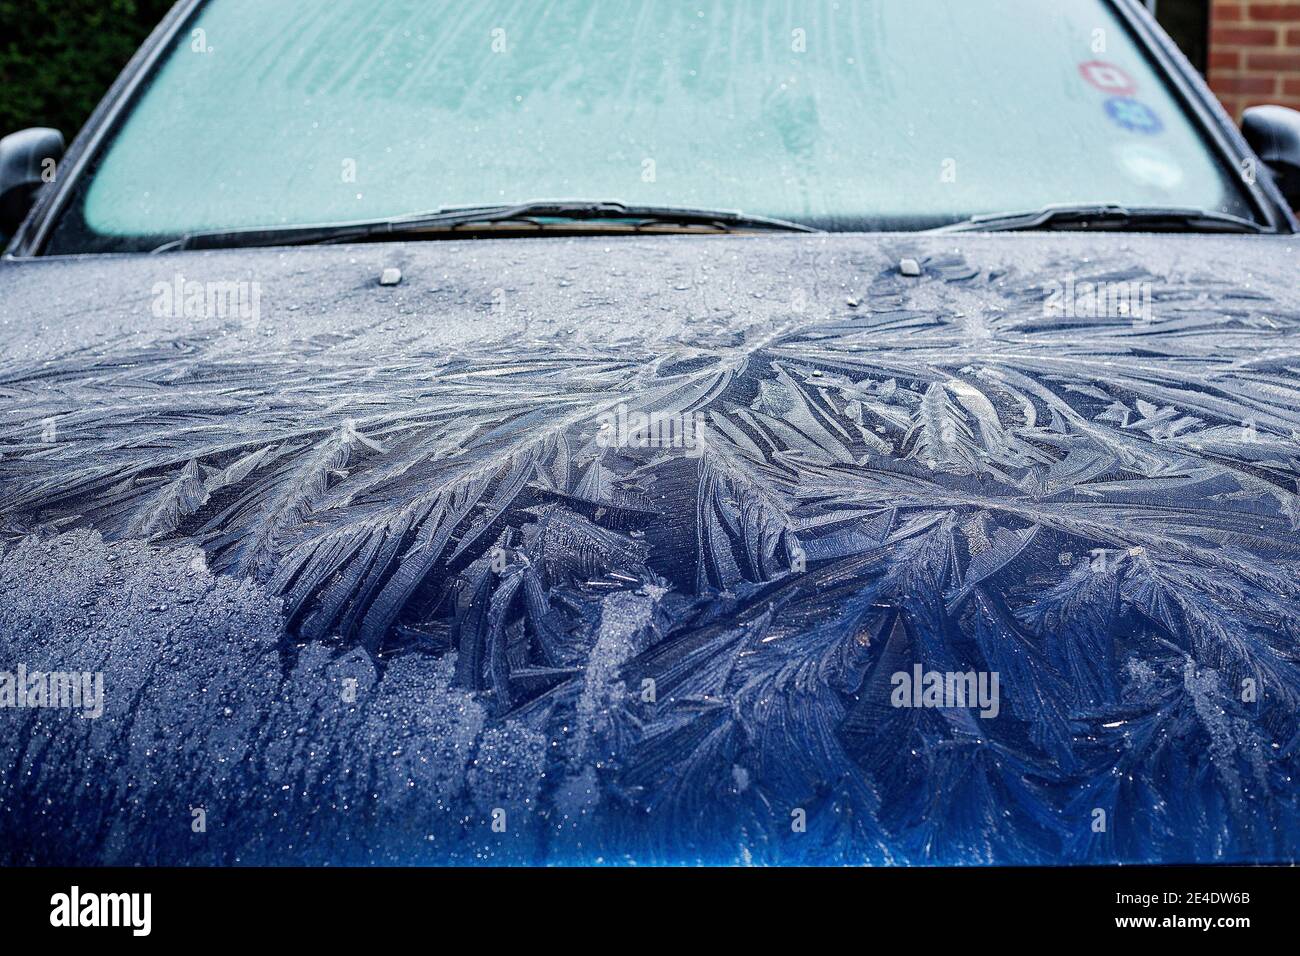 A thick, patterned, frost on the windscreen and bonnet (hood) of a blue Ford Mondeo car. Stock Photo